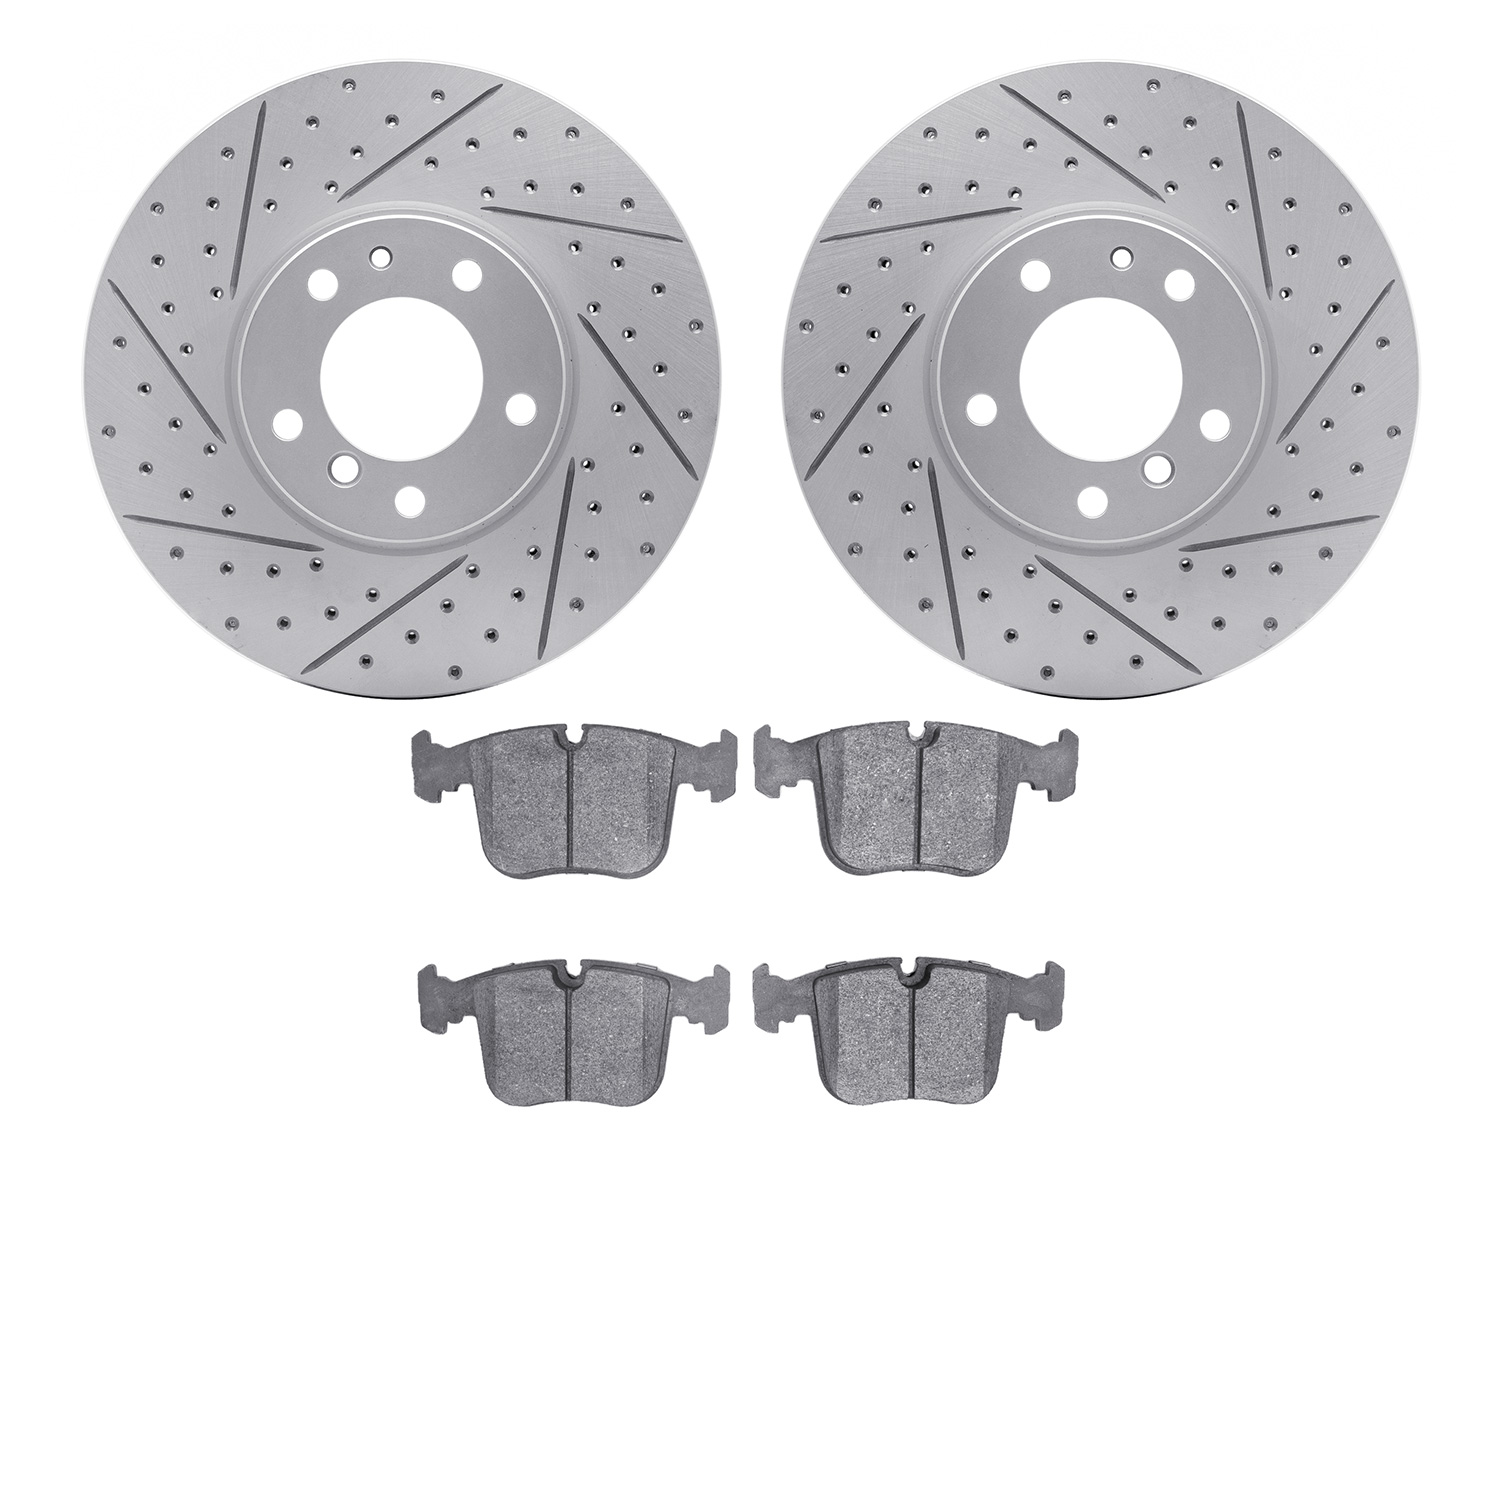 2502-31010 Geoperformance Drilled/Slotted Rotors w/5000 Advanced Brake Pads Kit, 1991-1993 BMW, Position: Front